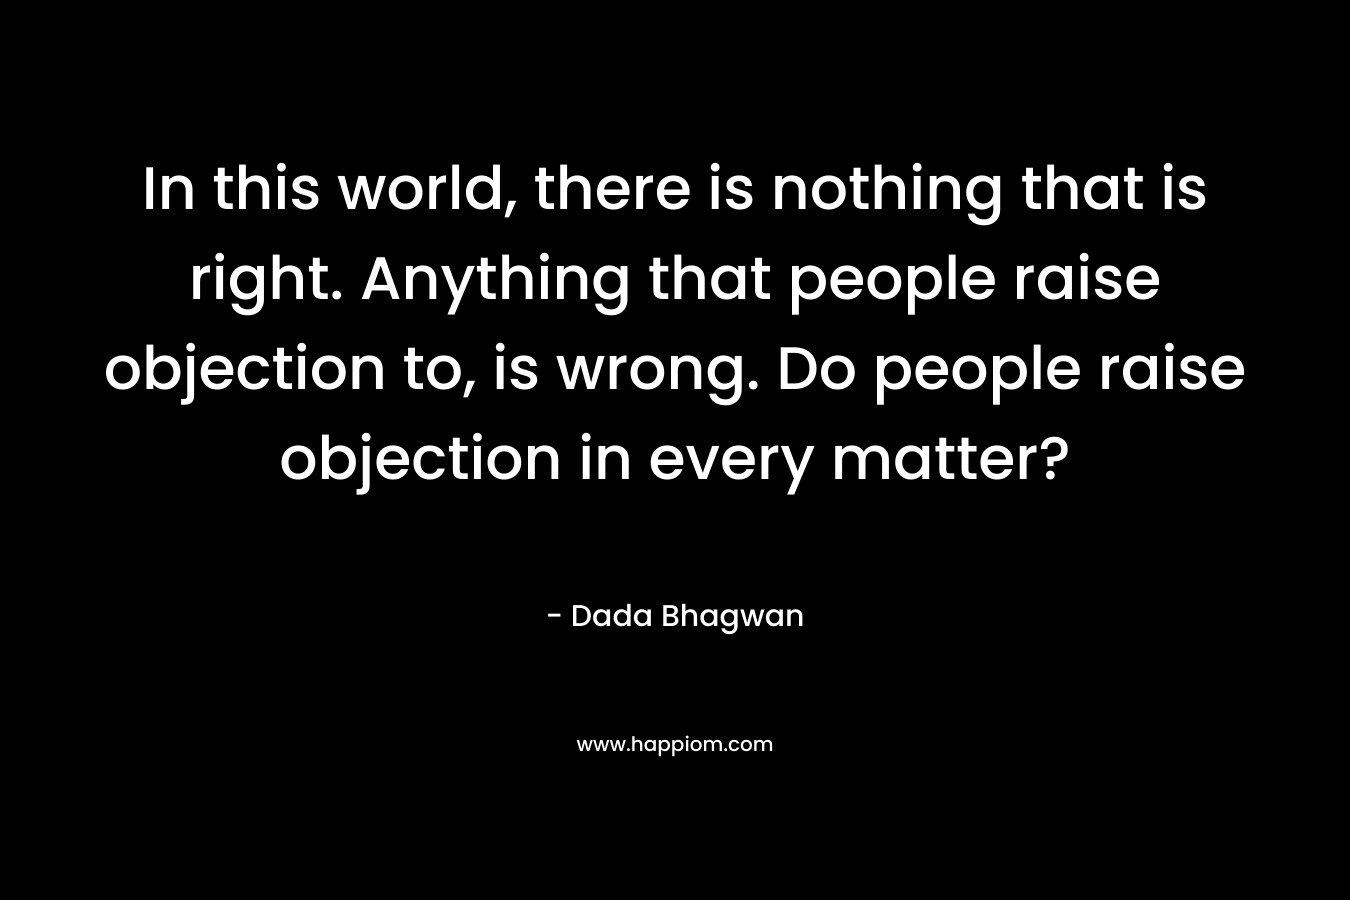 In this world, there is nothing that is right. Anything that people raise objection to, is wrong. Do people raise objection in every matter?